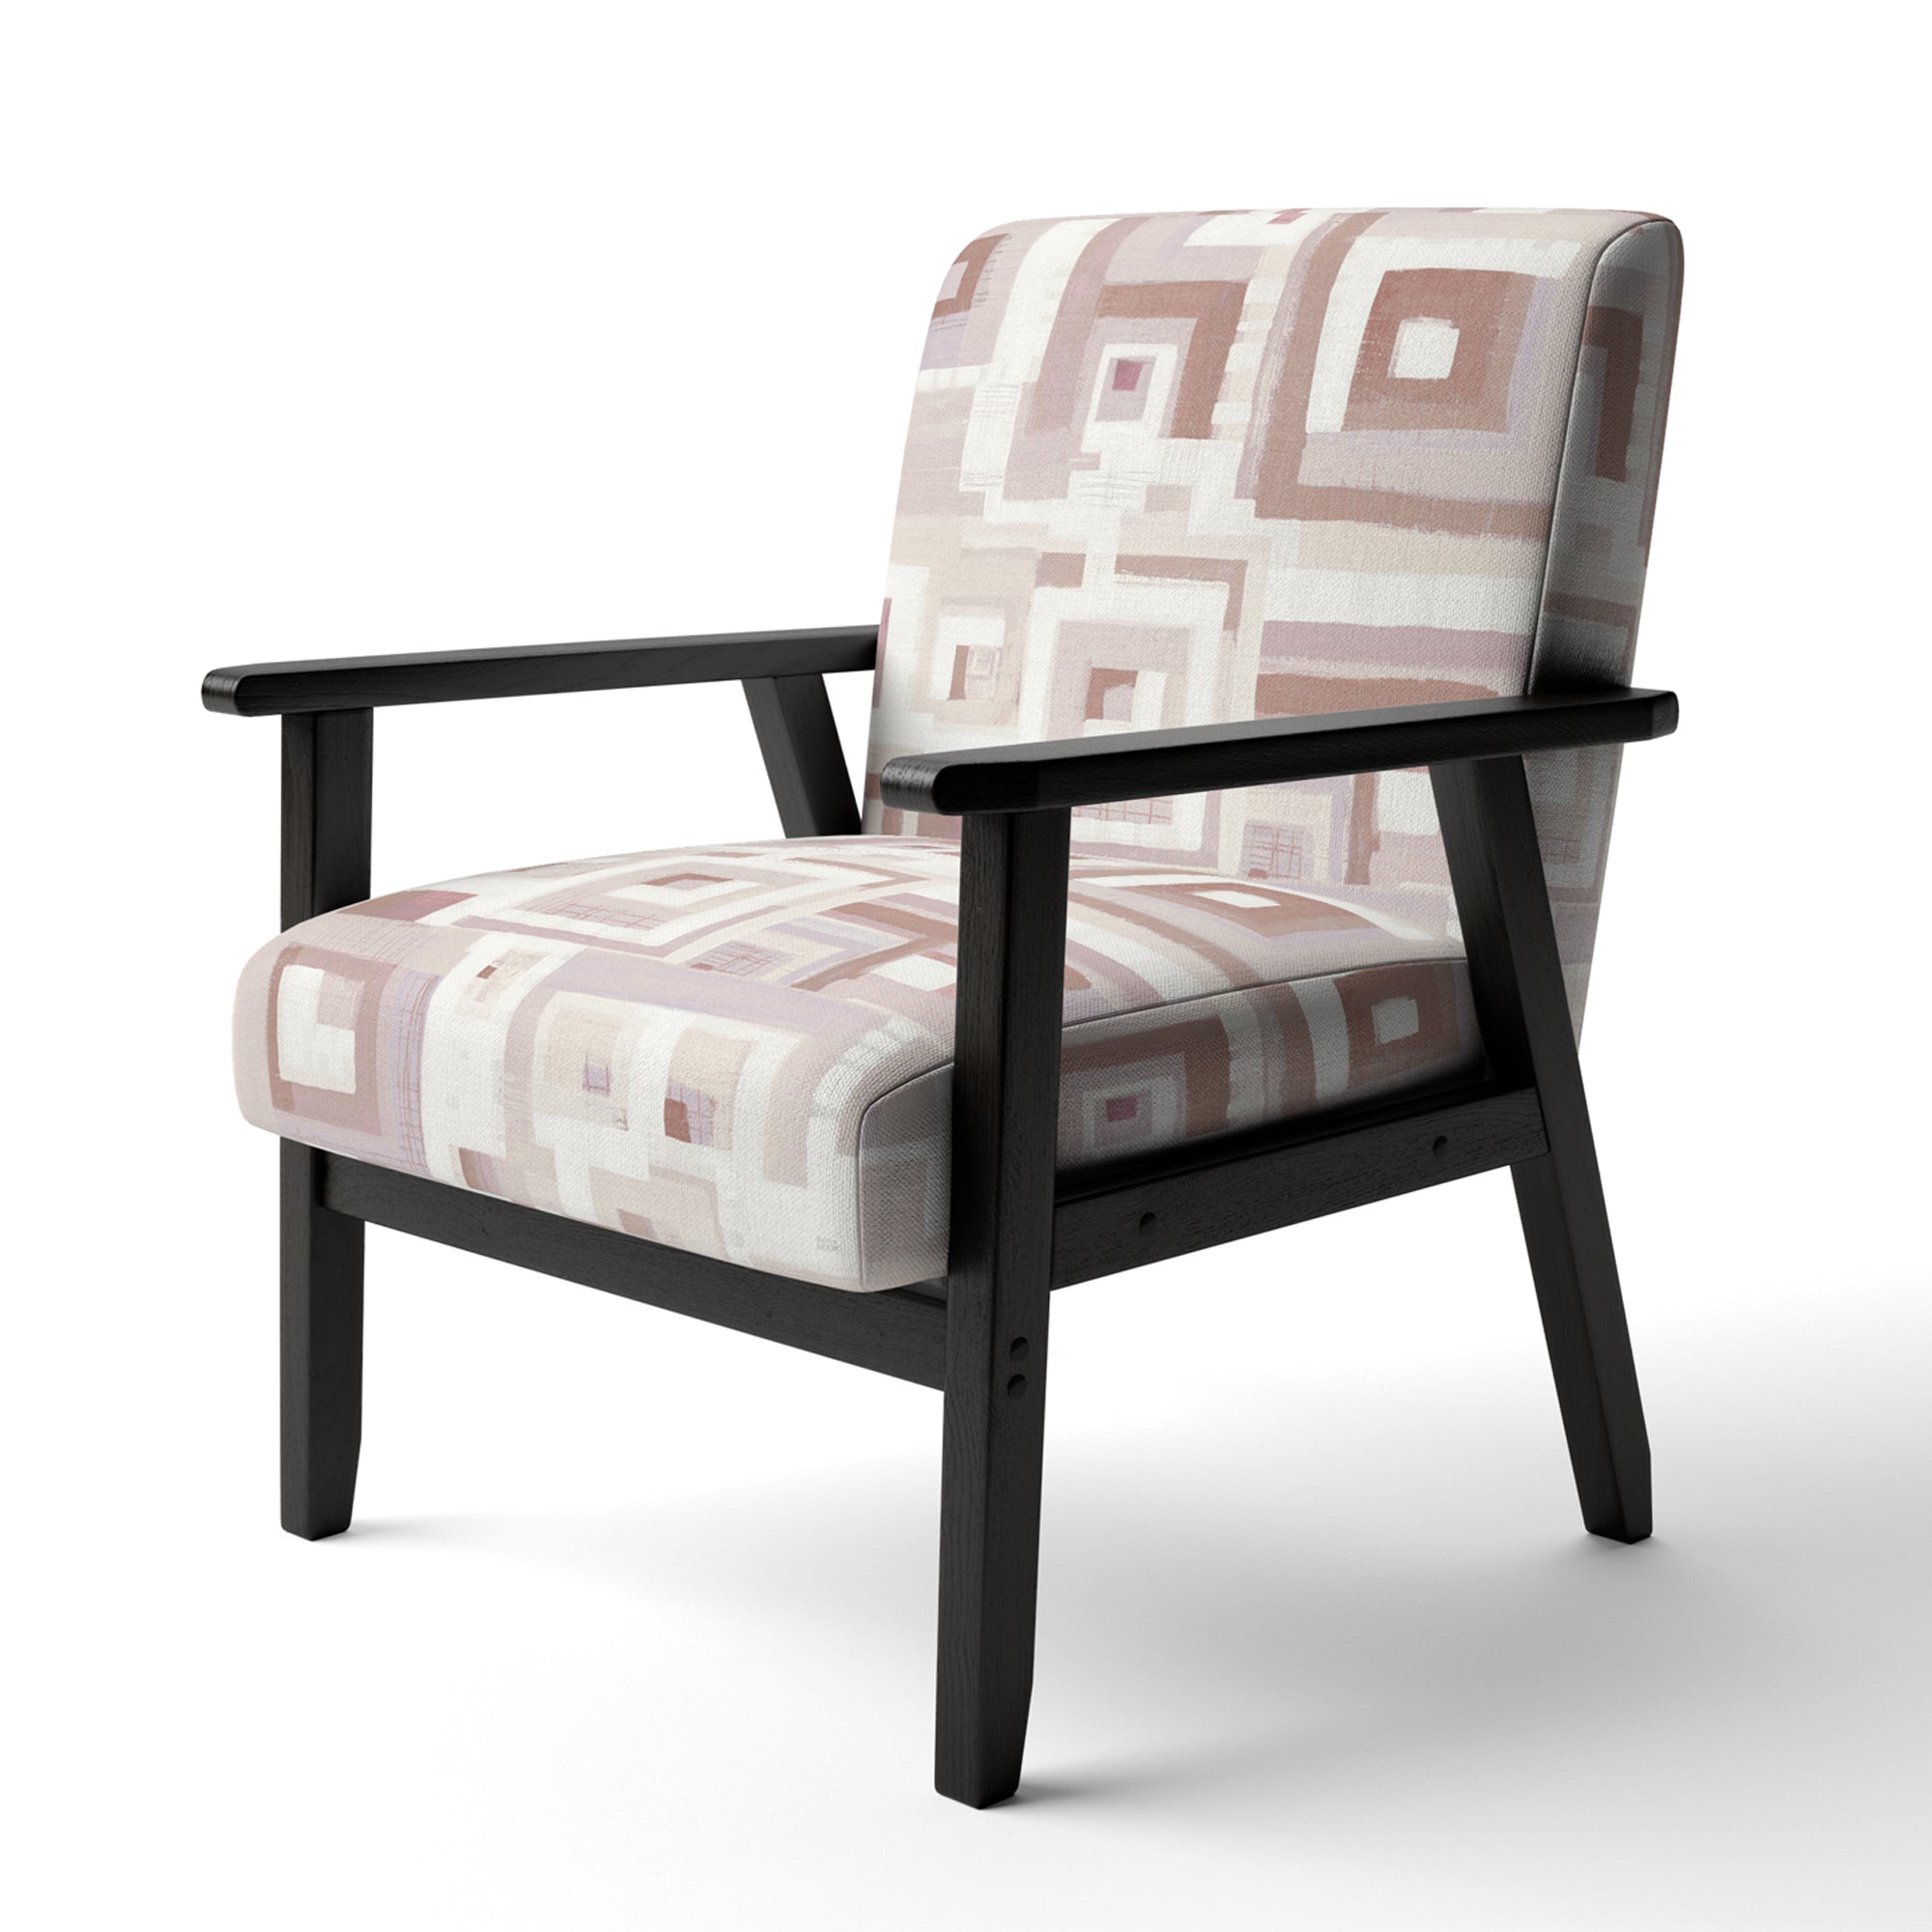 Pink Geometric Form Windows II Transitional Accent Chair